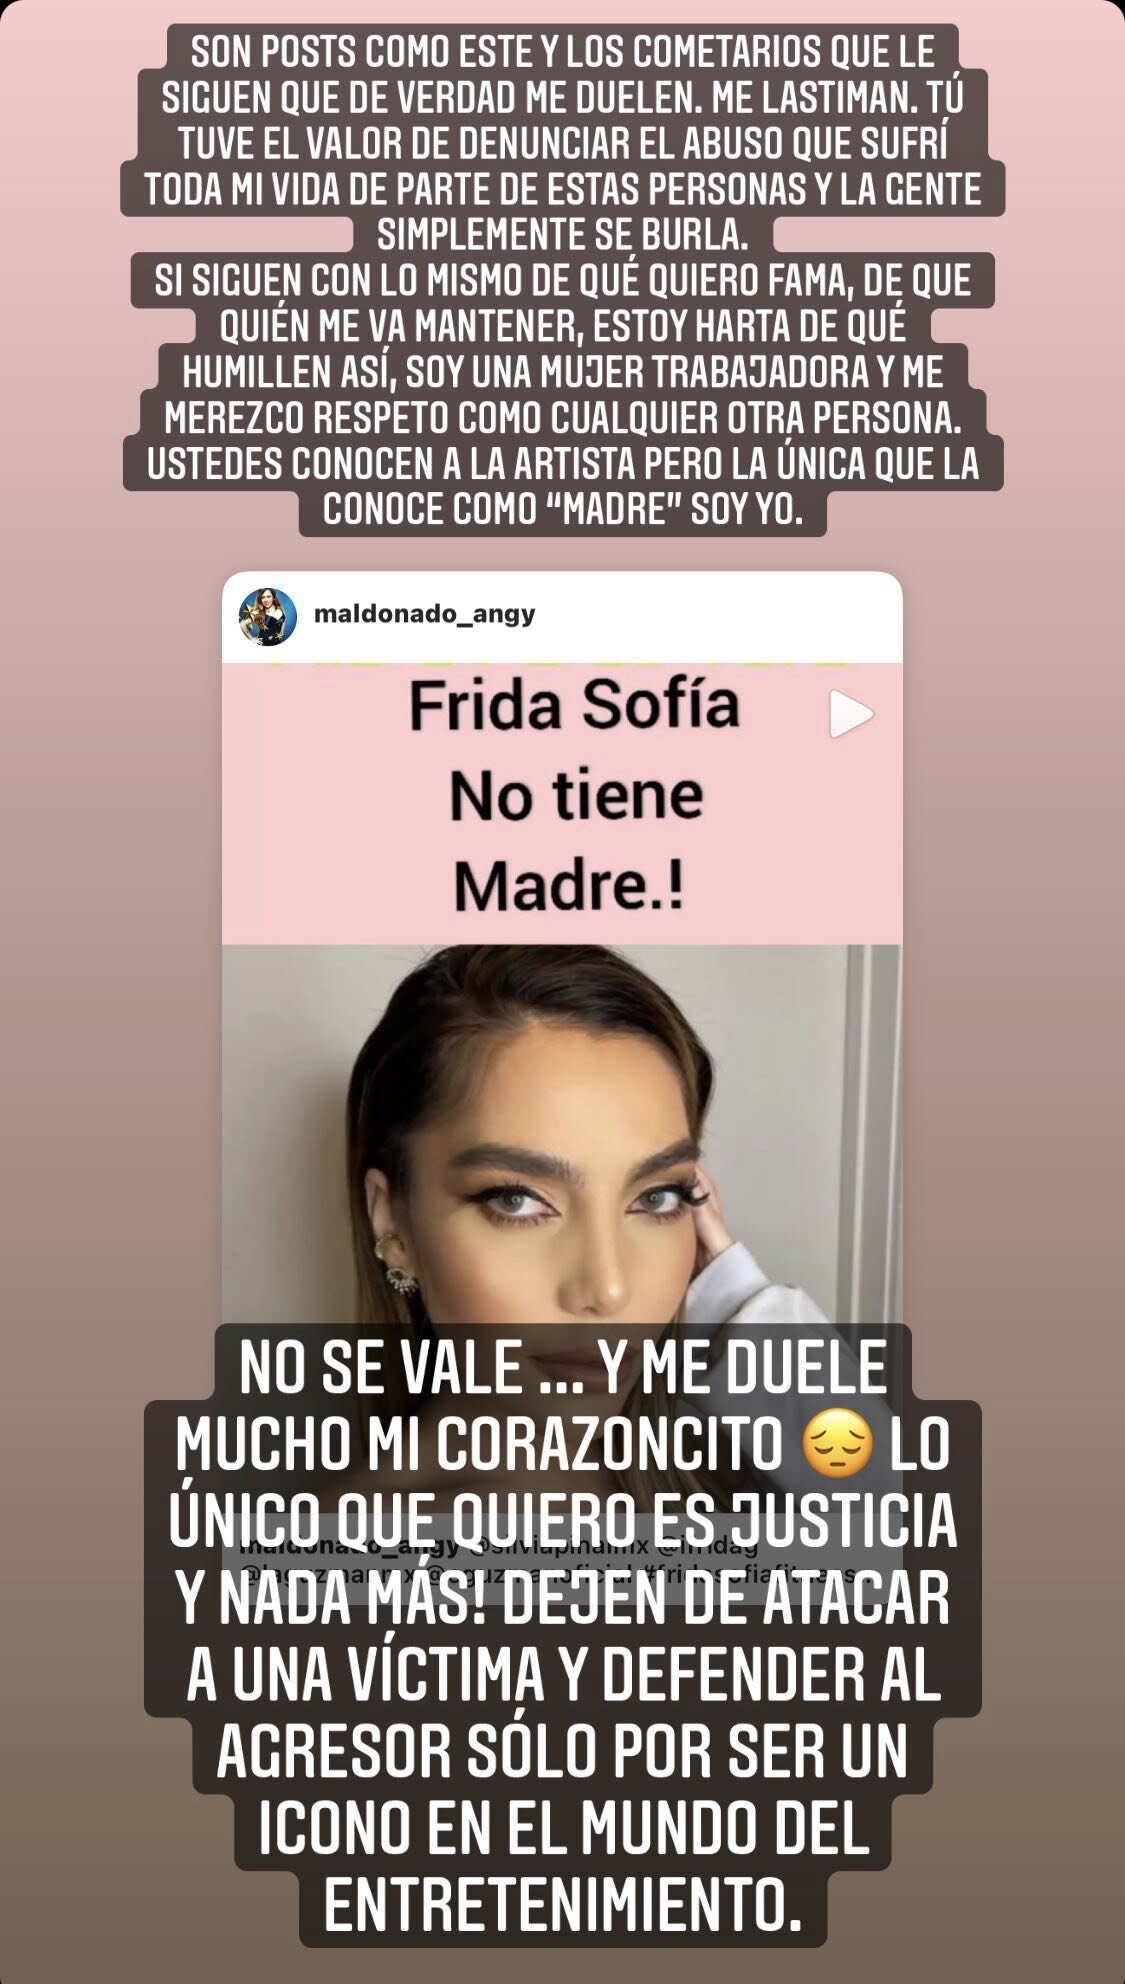 “Tired of humiliation!”  Frida’s heartbreaking plea in the face of her torn harassment